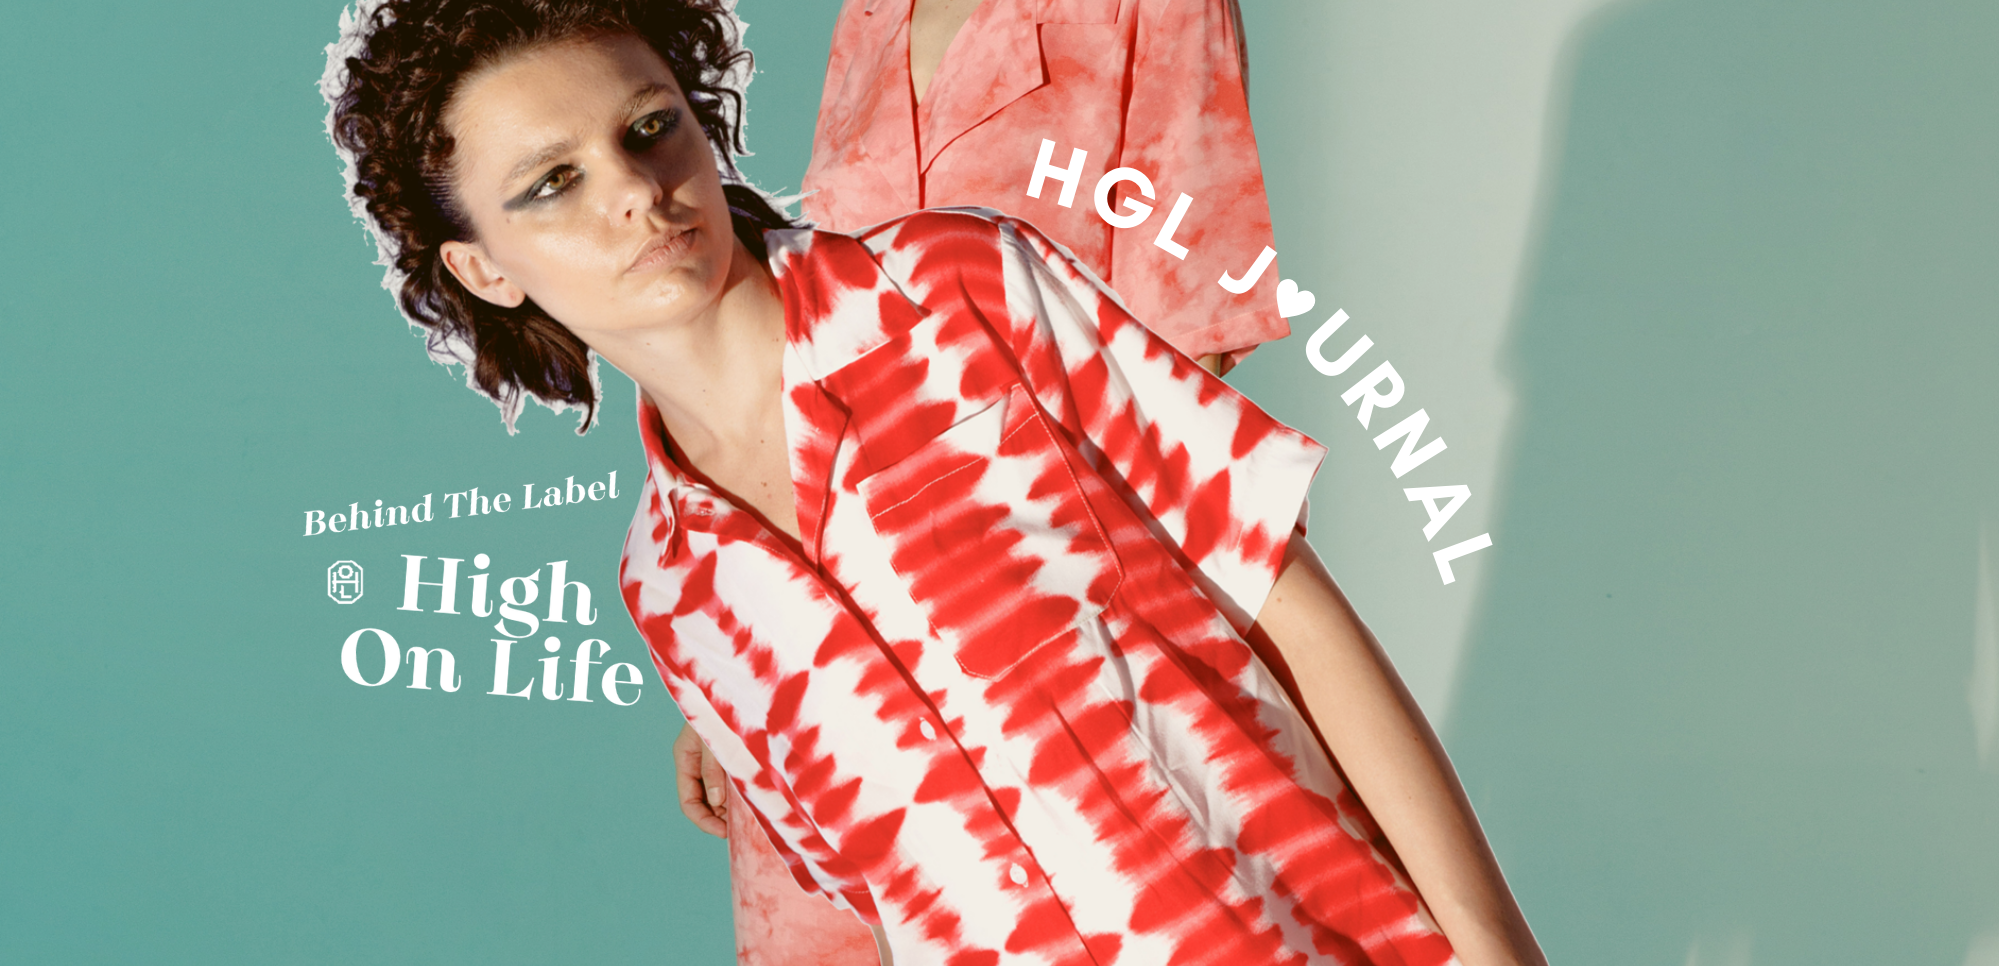 HGL JOURNAL : BEHIND THE LABEL HIGH ON LIFE